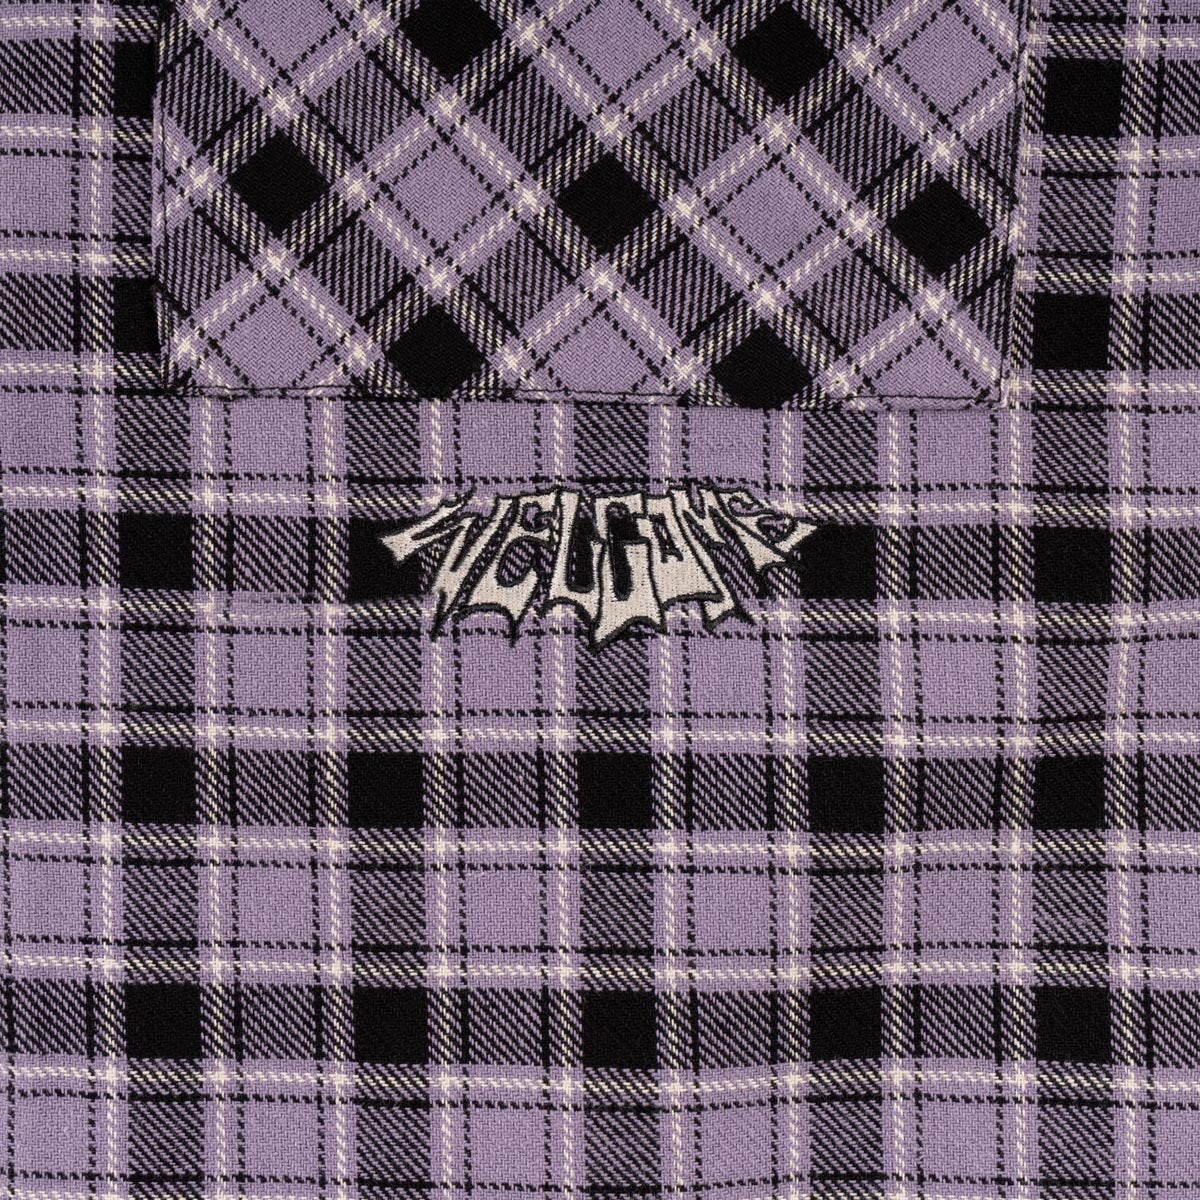 Welcome Cell Woven Plaid Zip Shirt - Lavender Grey image 4